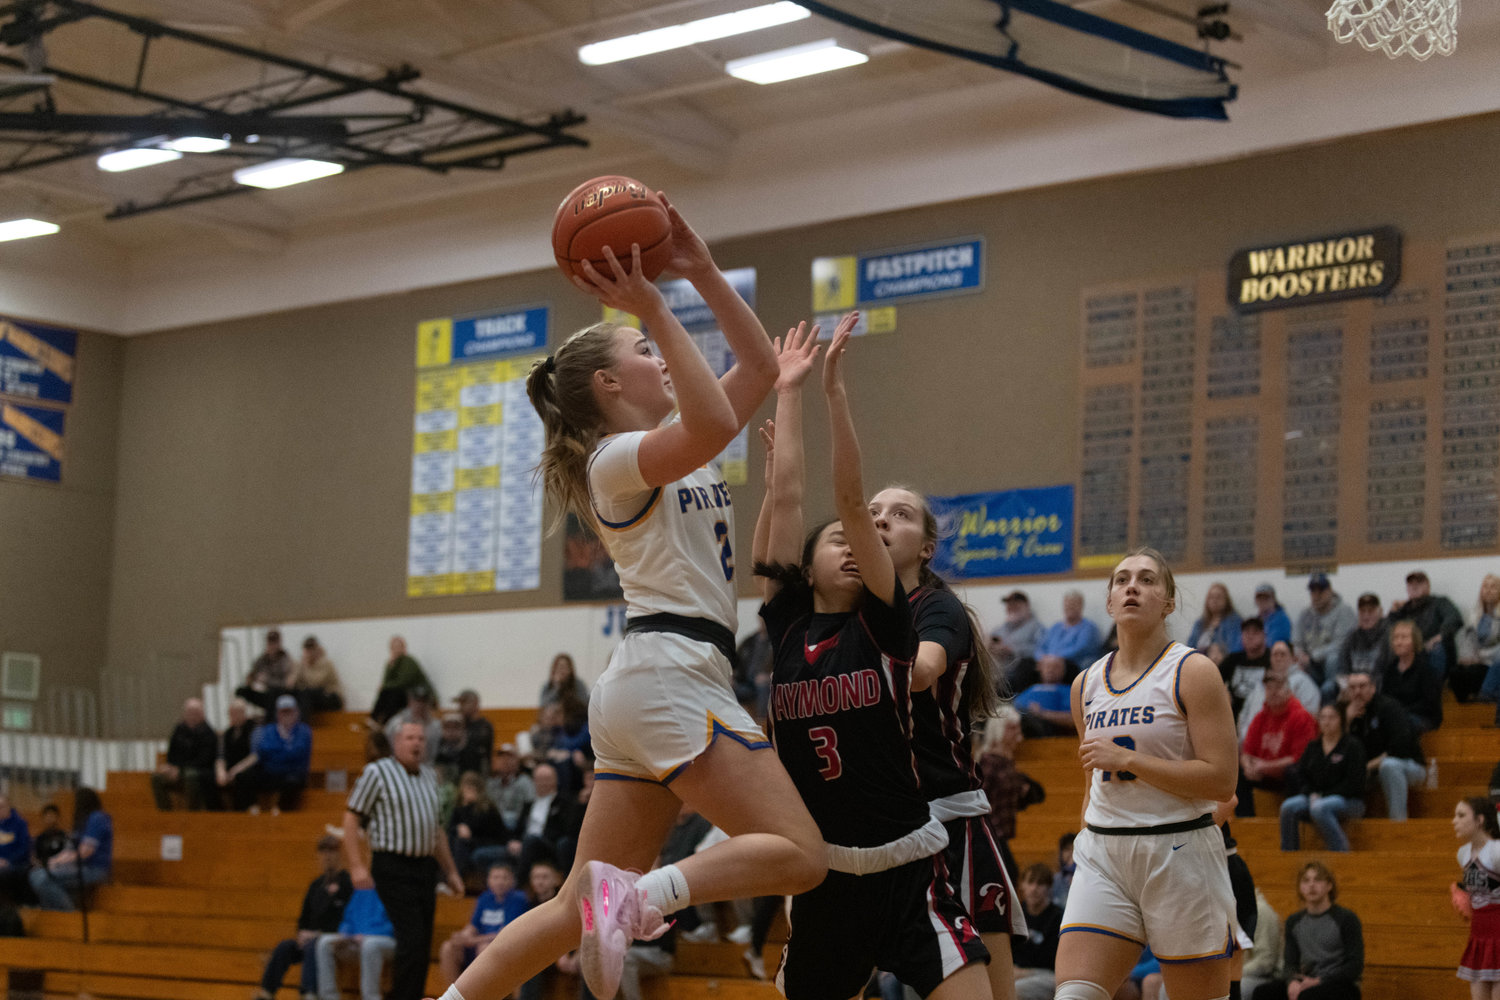 Danika Hallom goes through contact to the basket during the first quarter of Adna's district matchup against Raymond at Rochester on Feb. 7.